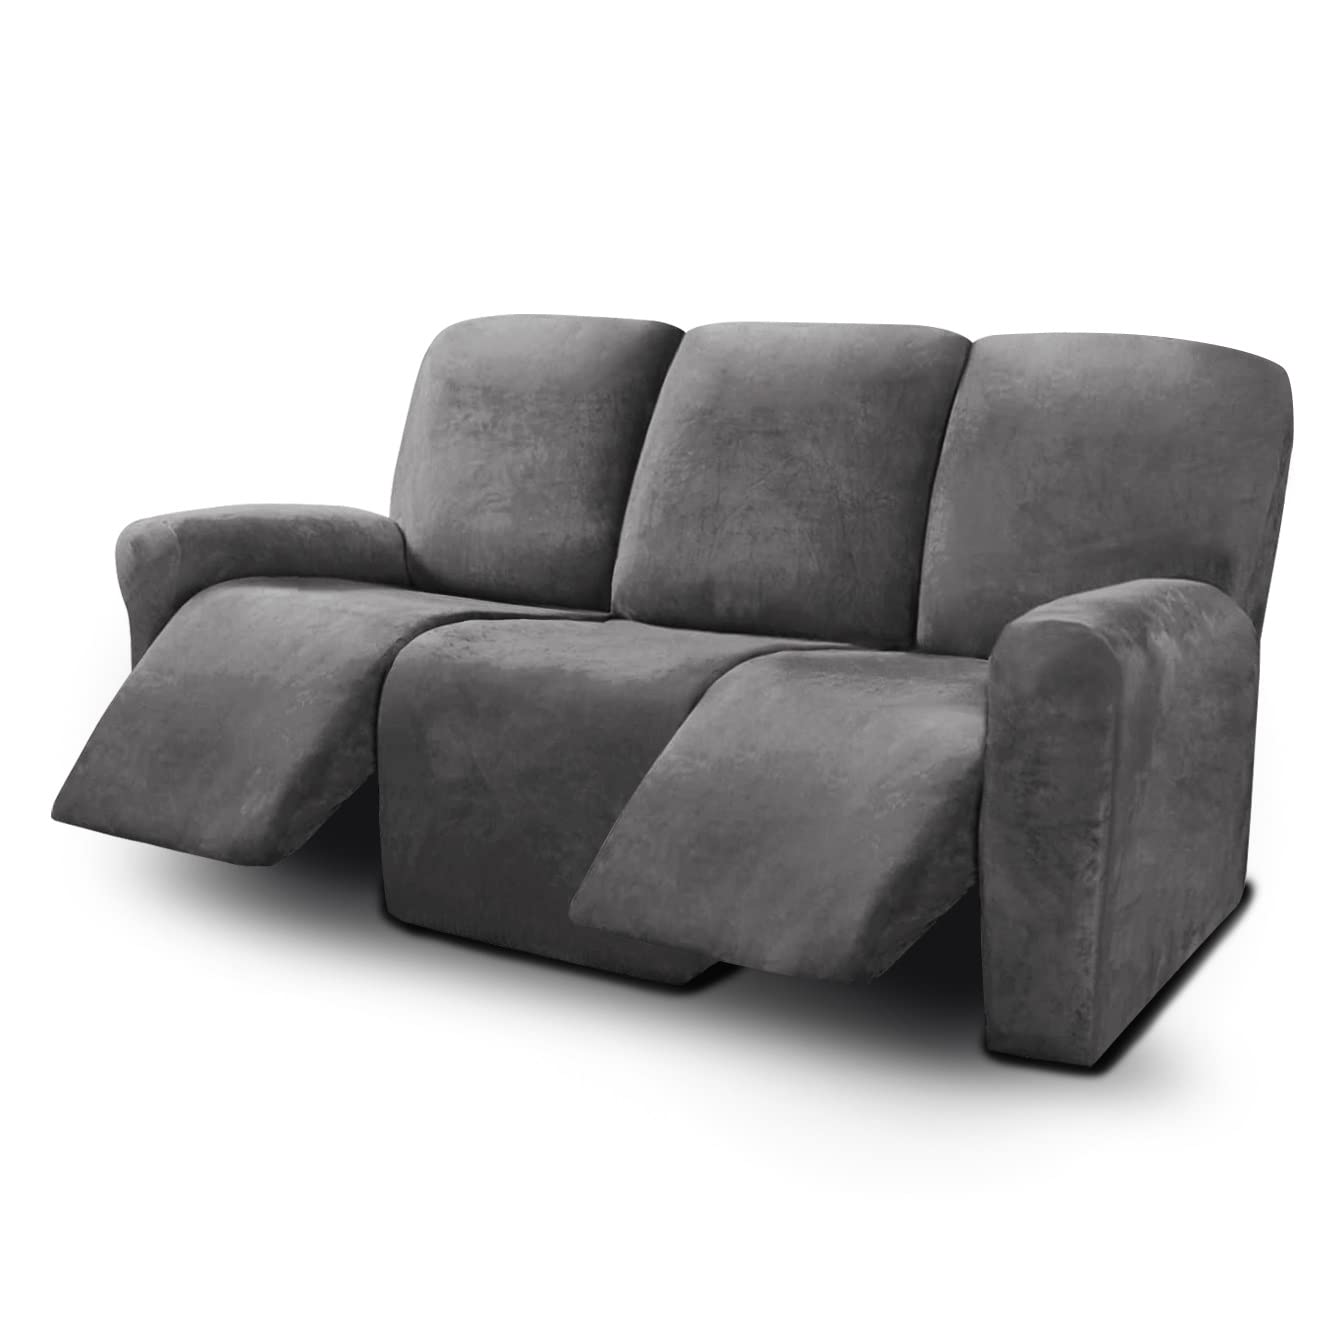 sofa covers for recliners